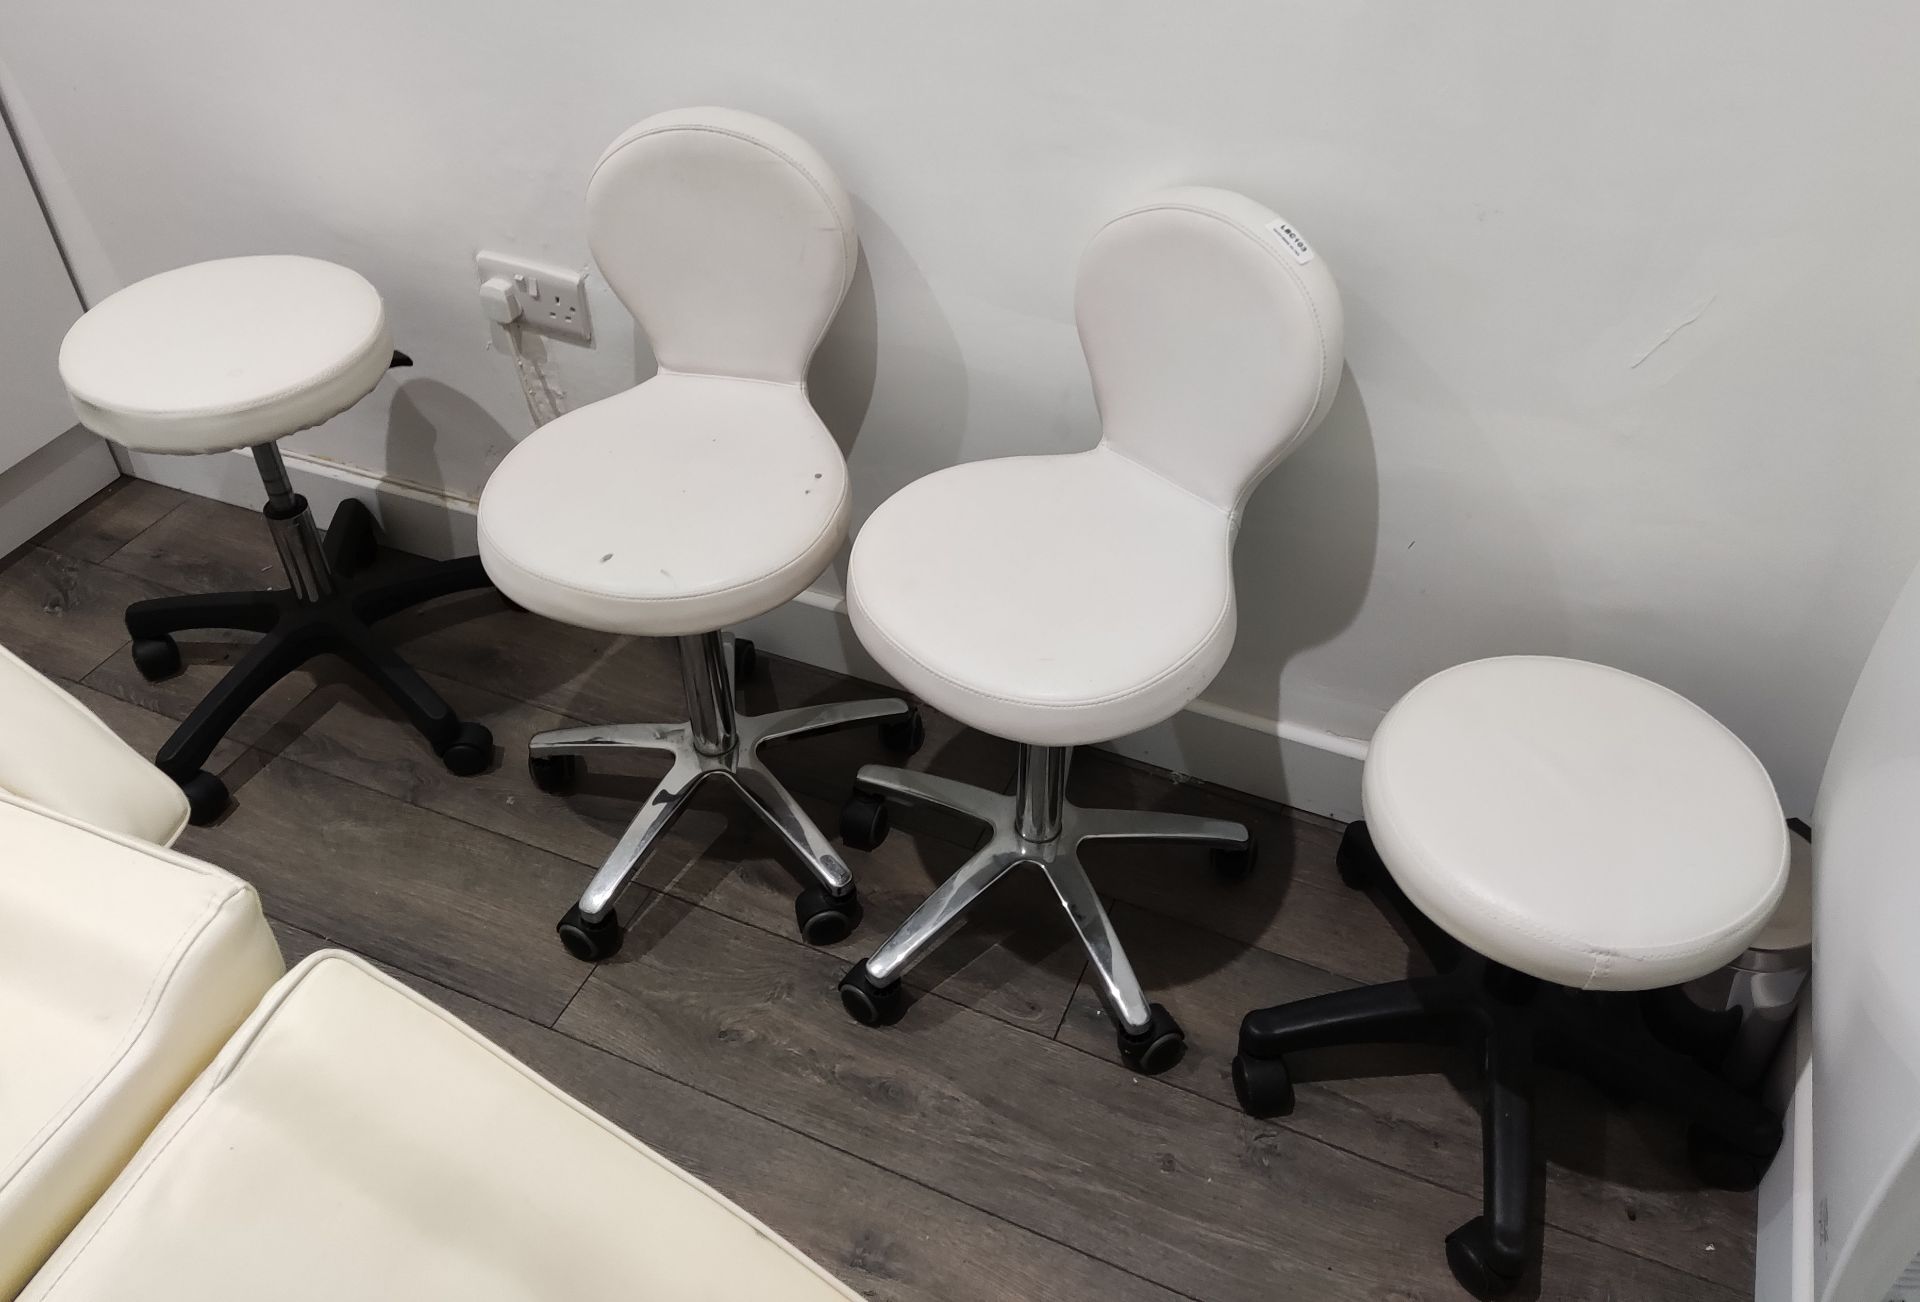 4 x Beauticians Treatment Chairs / Stools - Includes 2 Stools and 2 Seats - LBC103 - CL763- Location